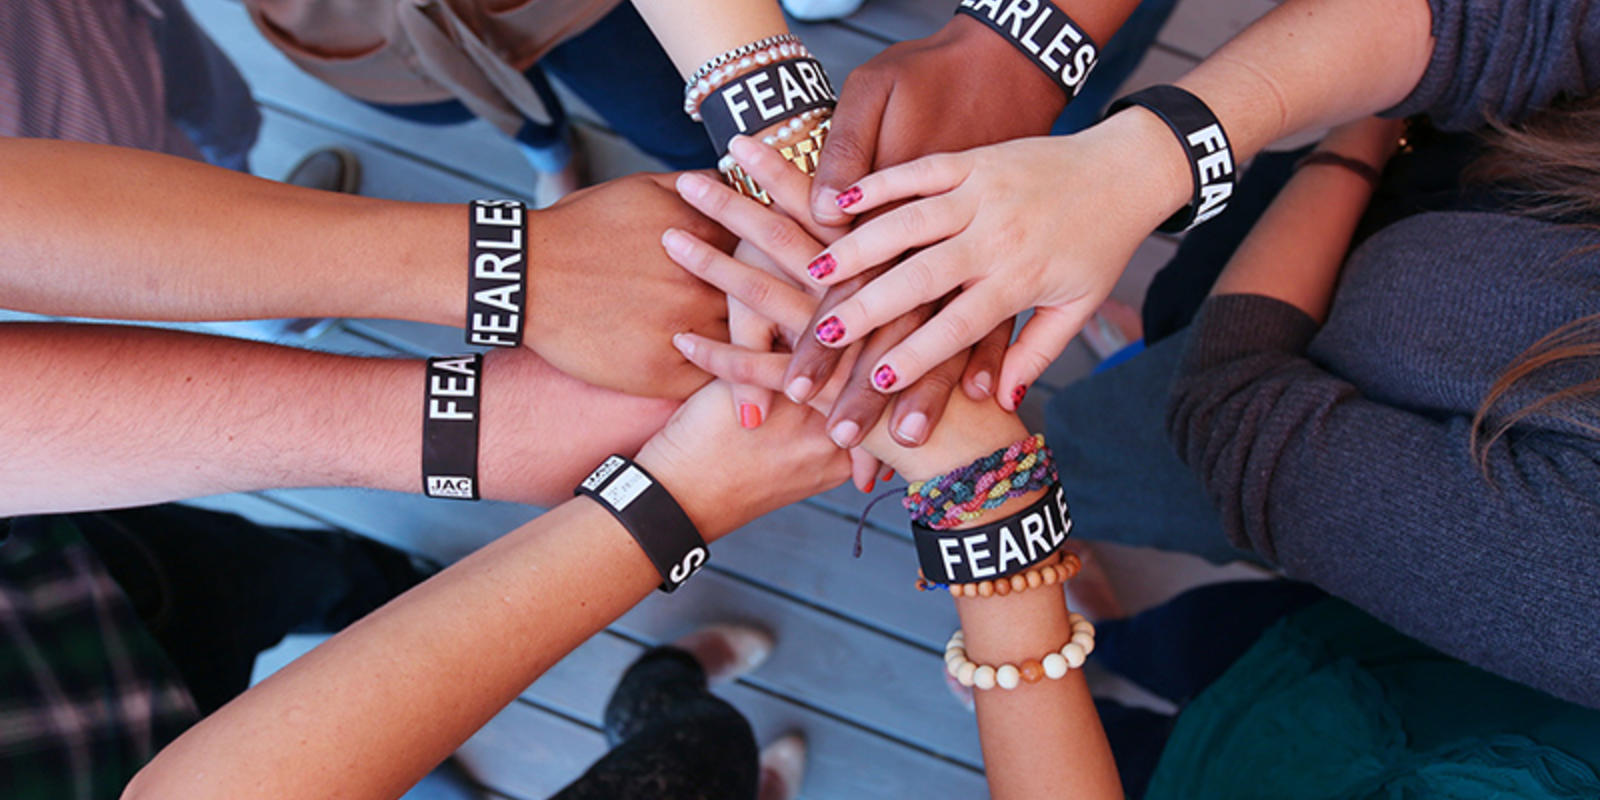 People's hands all in the middle with the Zeno fearless bracelets on